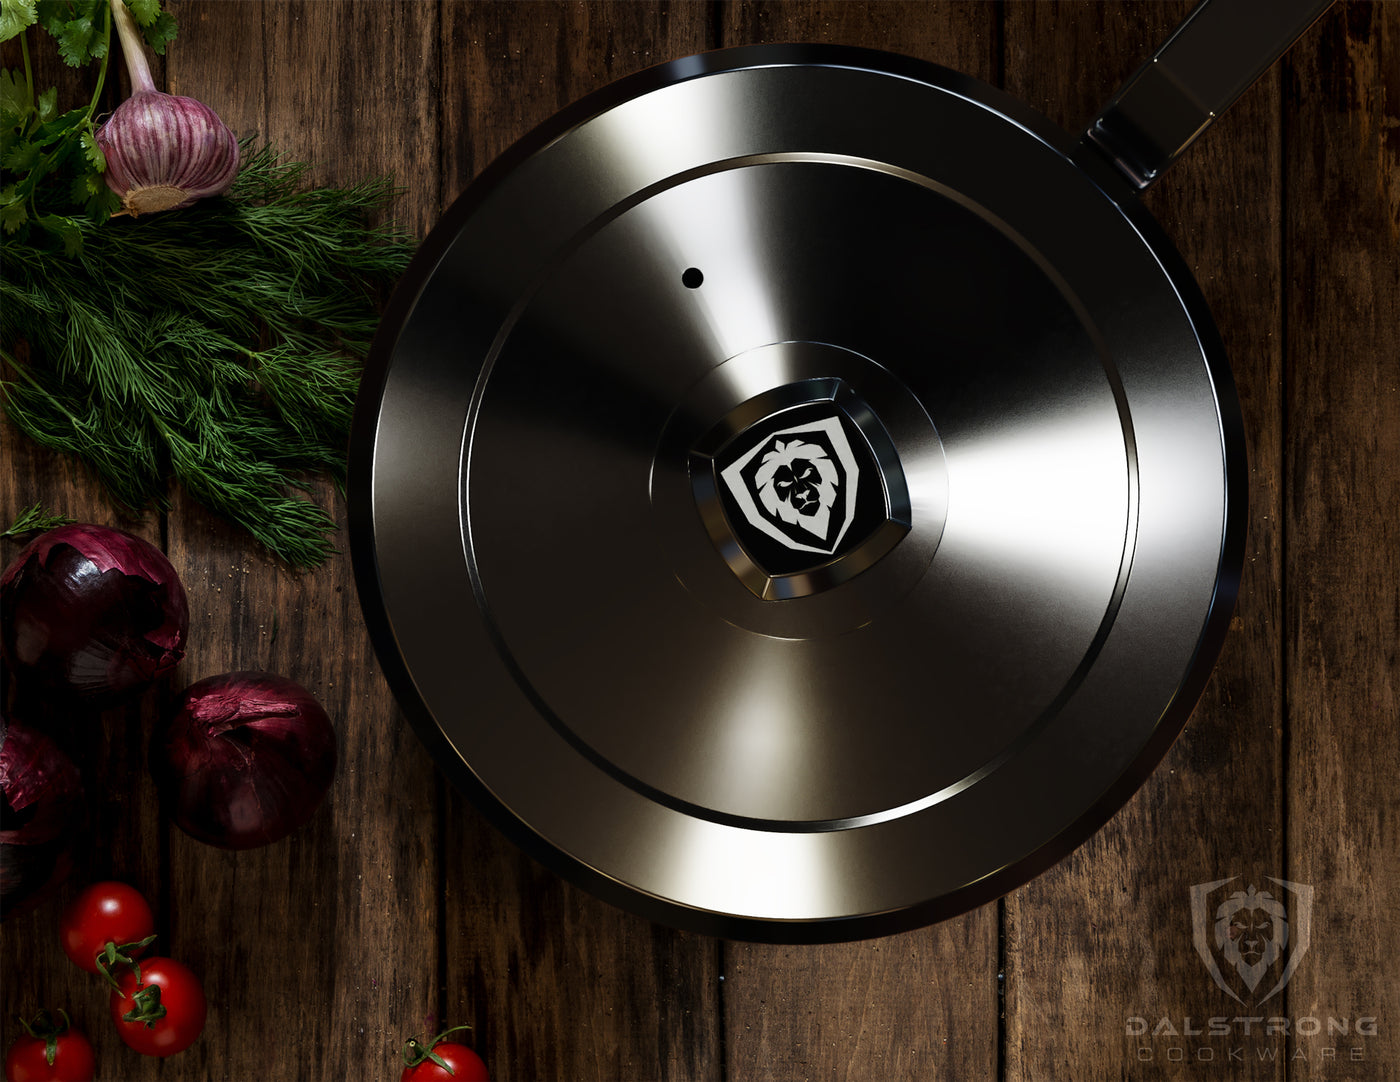 9" Frying Pan & Skillet | Hammered Finish Black | Avalon Series | Dalstrong ©